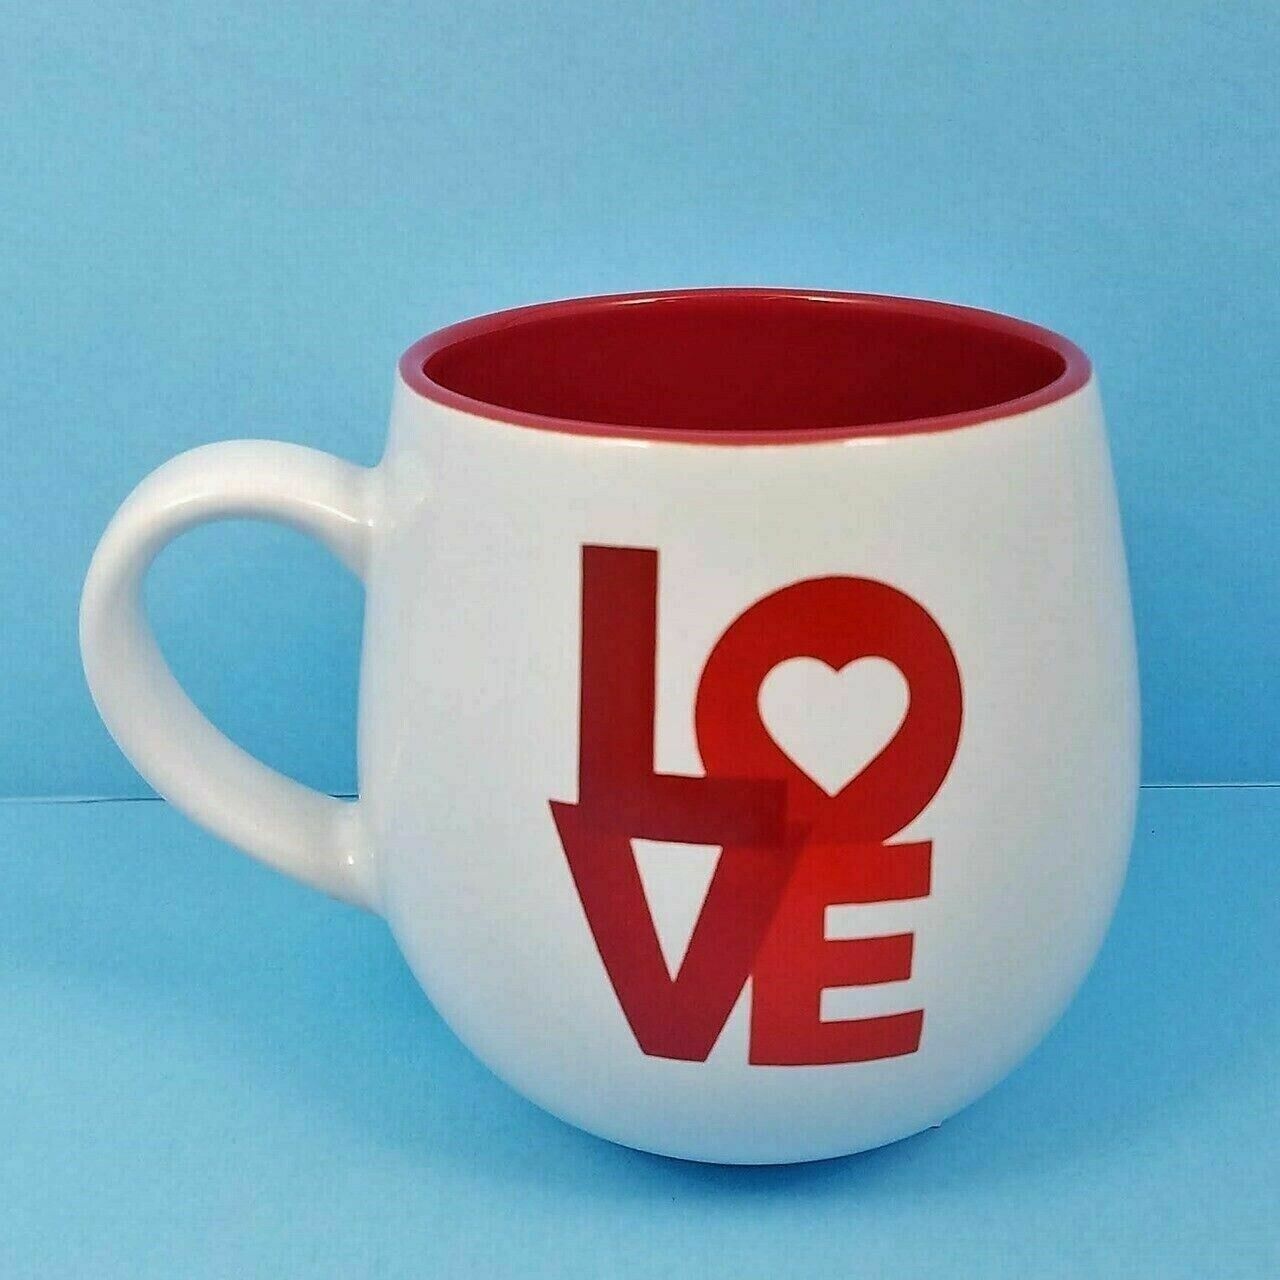 Primary image for Coffee Mug Cup Love in Red and White Colors by Blue Sky Spectrum 17oz 483ml